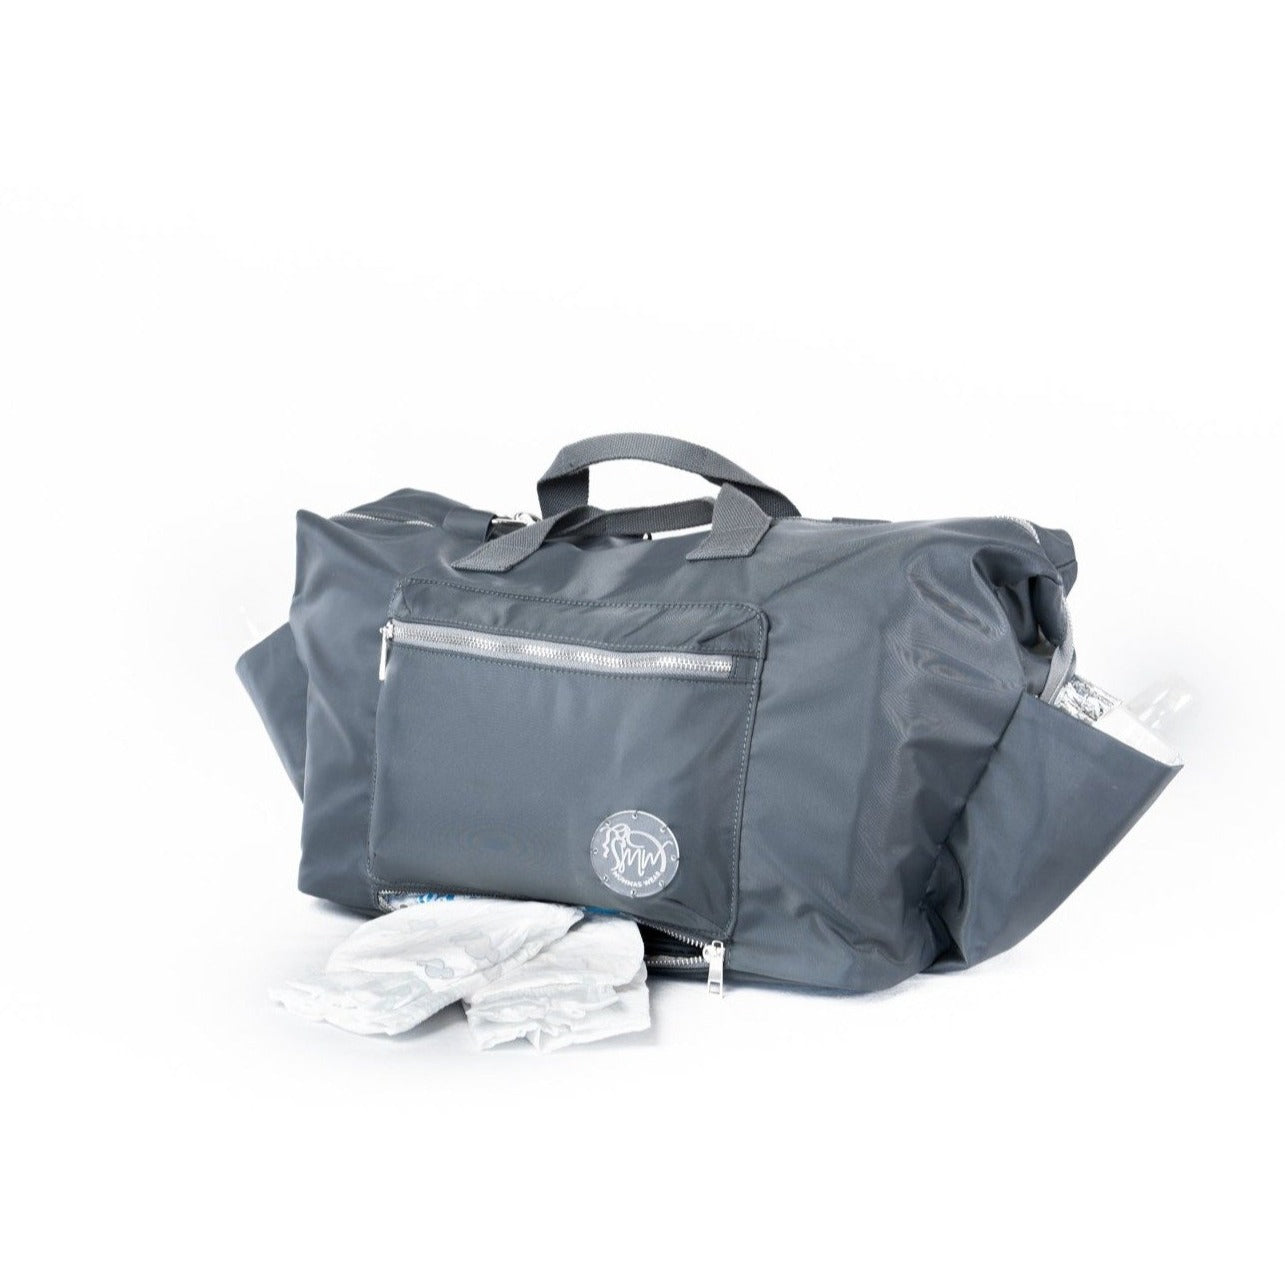 alt="The DUFFLE Nappy Bag showing secret bottom zipper compartment opened and nappies"